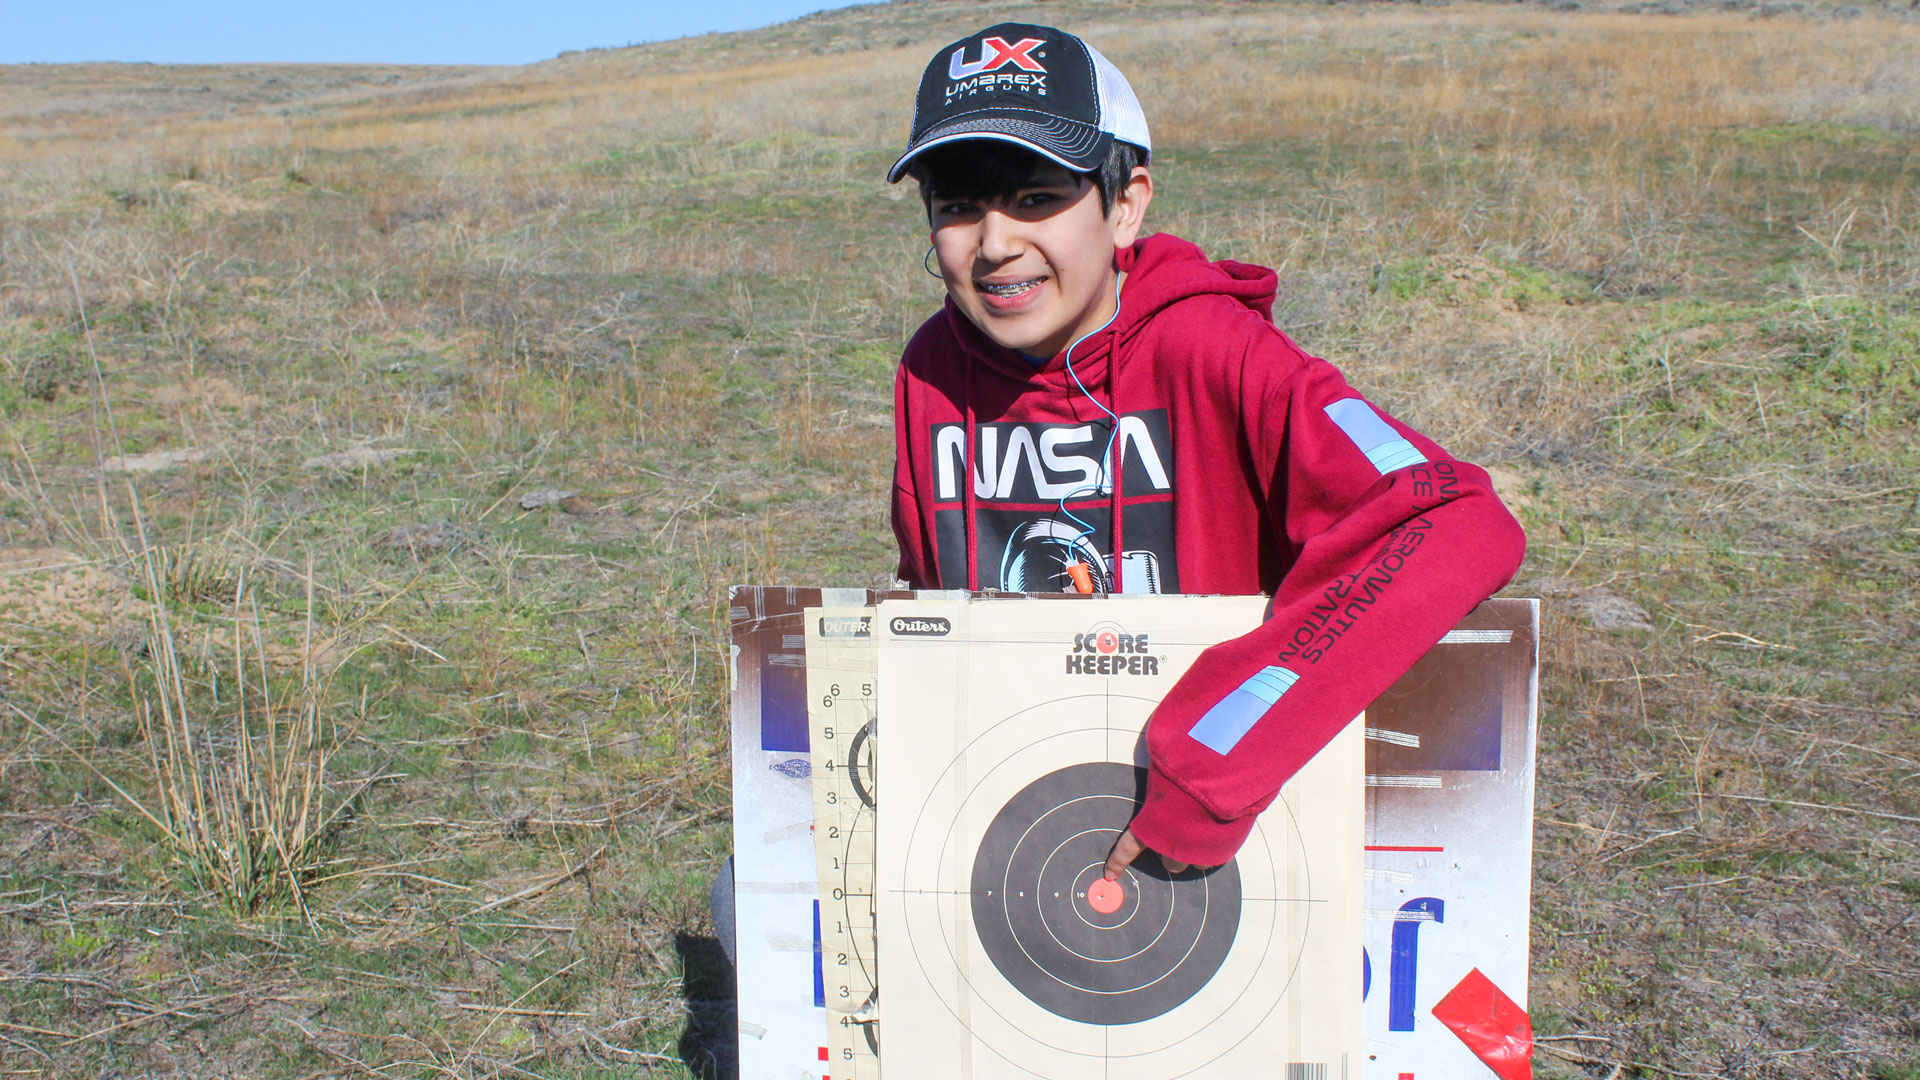 An airgun shooter collects targets after a shooting session.